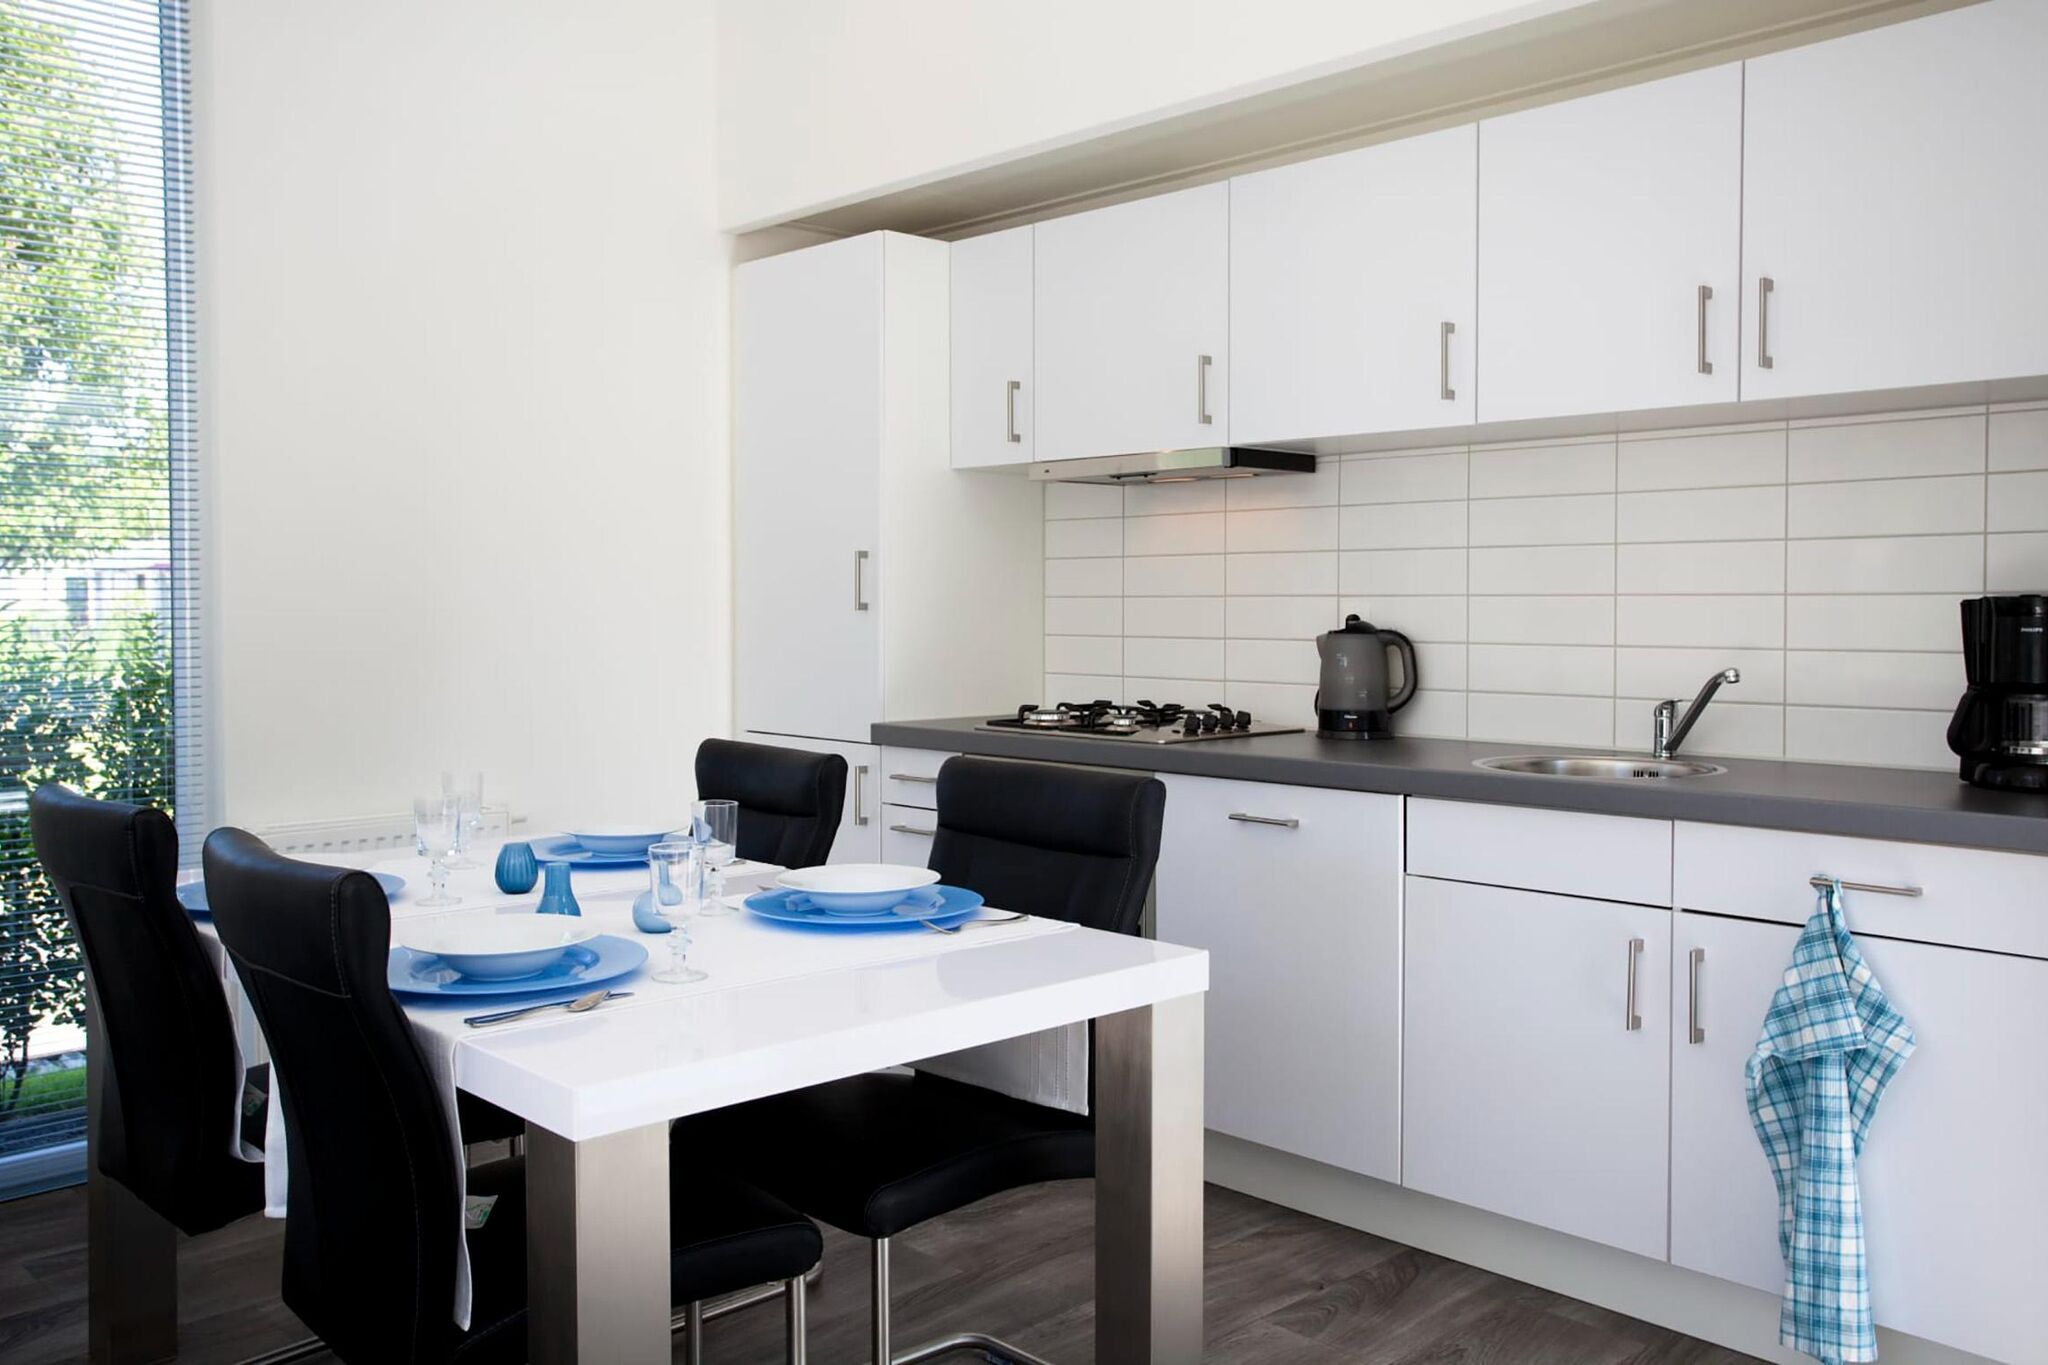 Modern holiday home with dishwasher, on a holiday park, 25 km. from Amsterdam